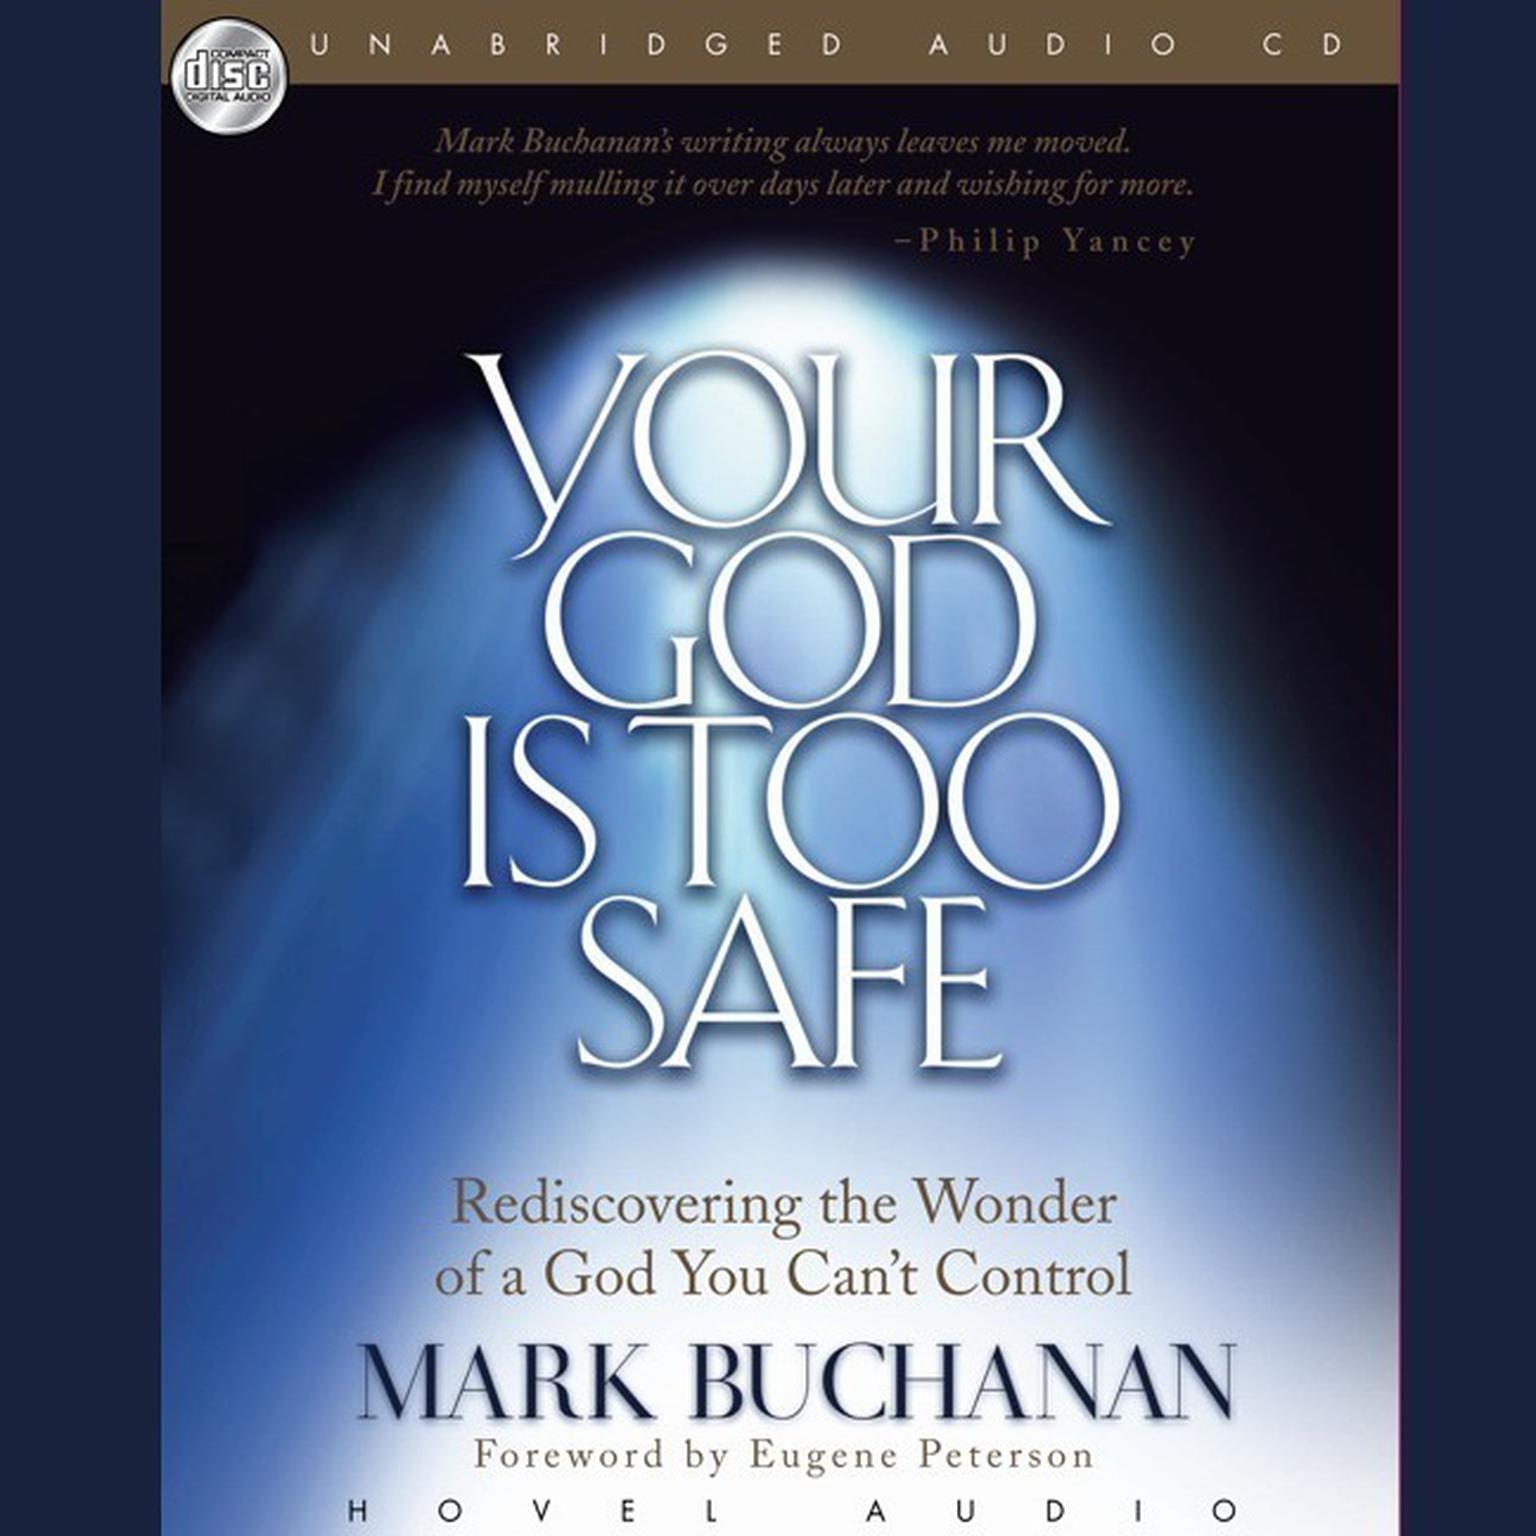 Your God Is Too Safe: Rediscovering the Wonder of a God You Cant Control Audiobook, by Mark Buchanan